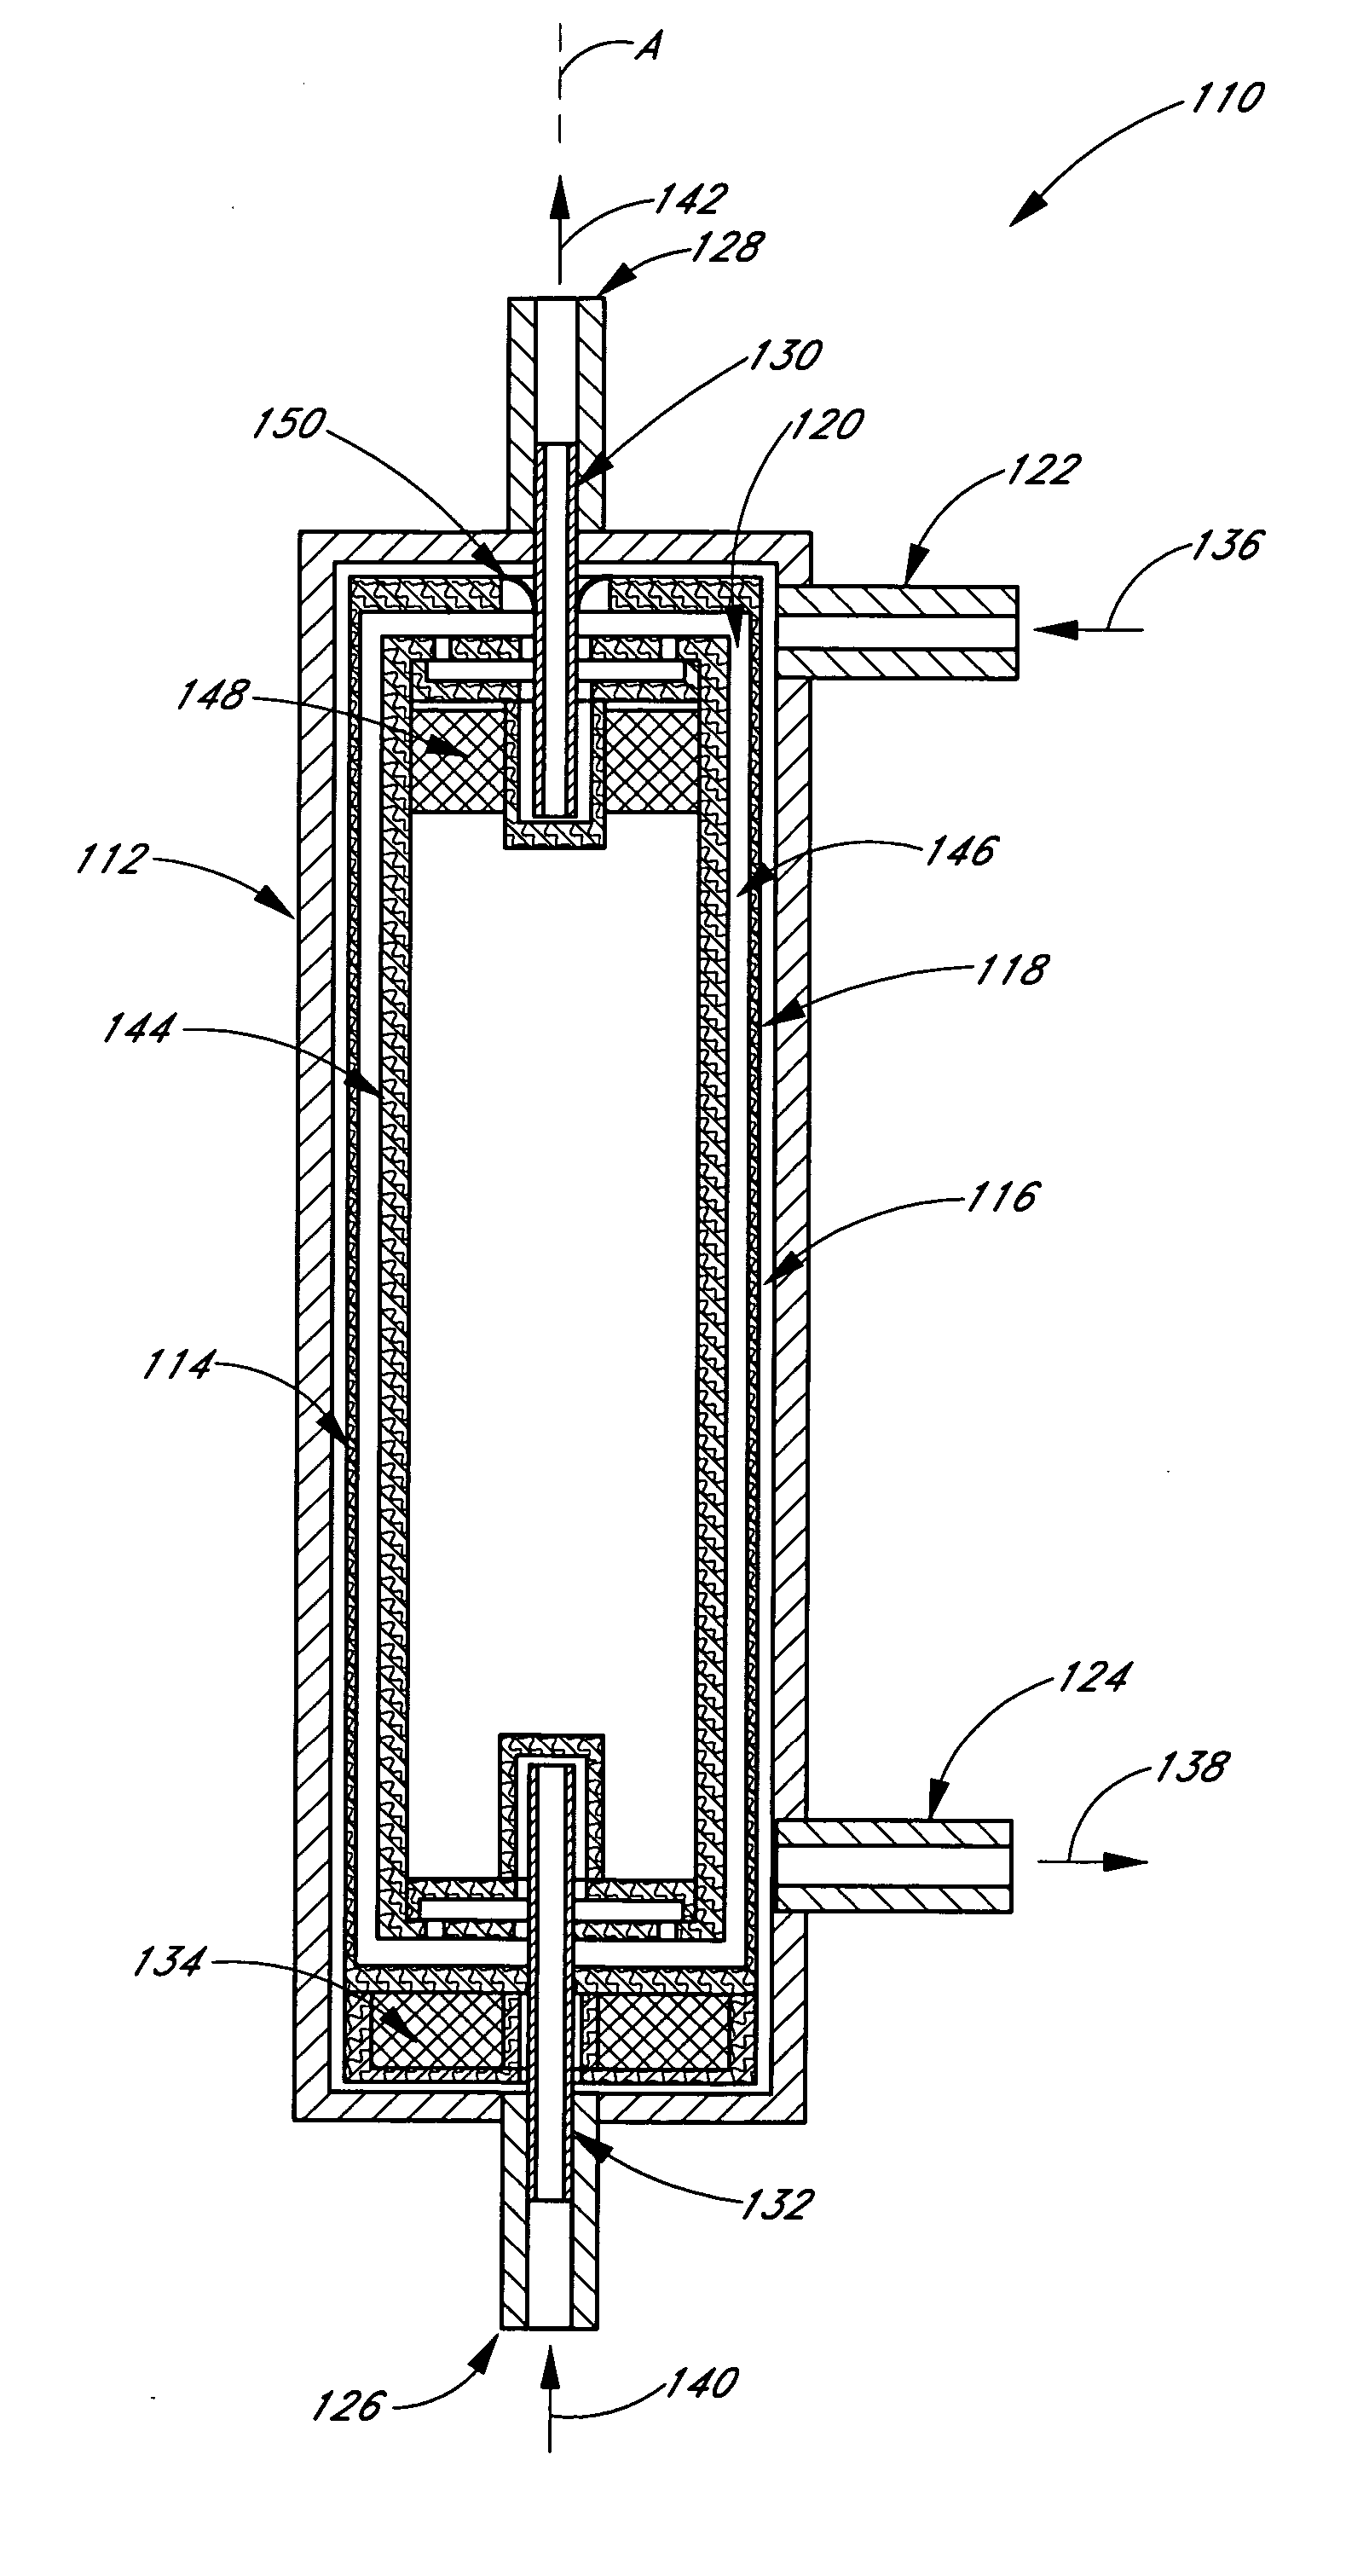 Two stage hemofiltration that generates replacement fluid